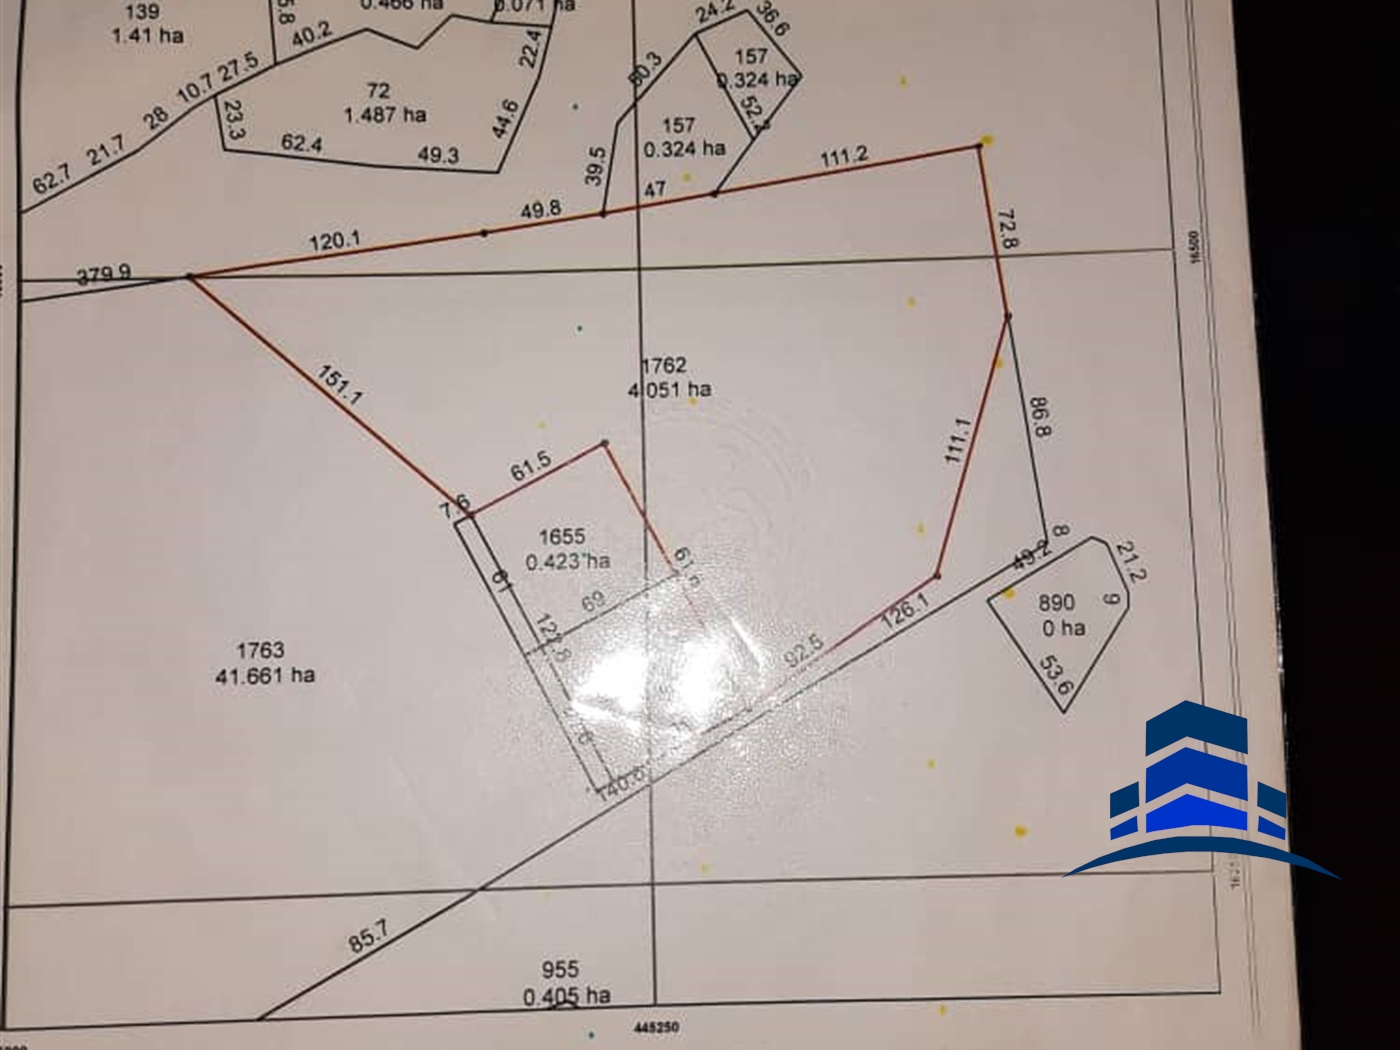 Commercial Land for sale in Busiro Wakiso